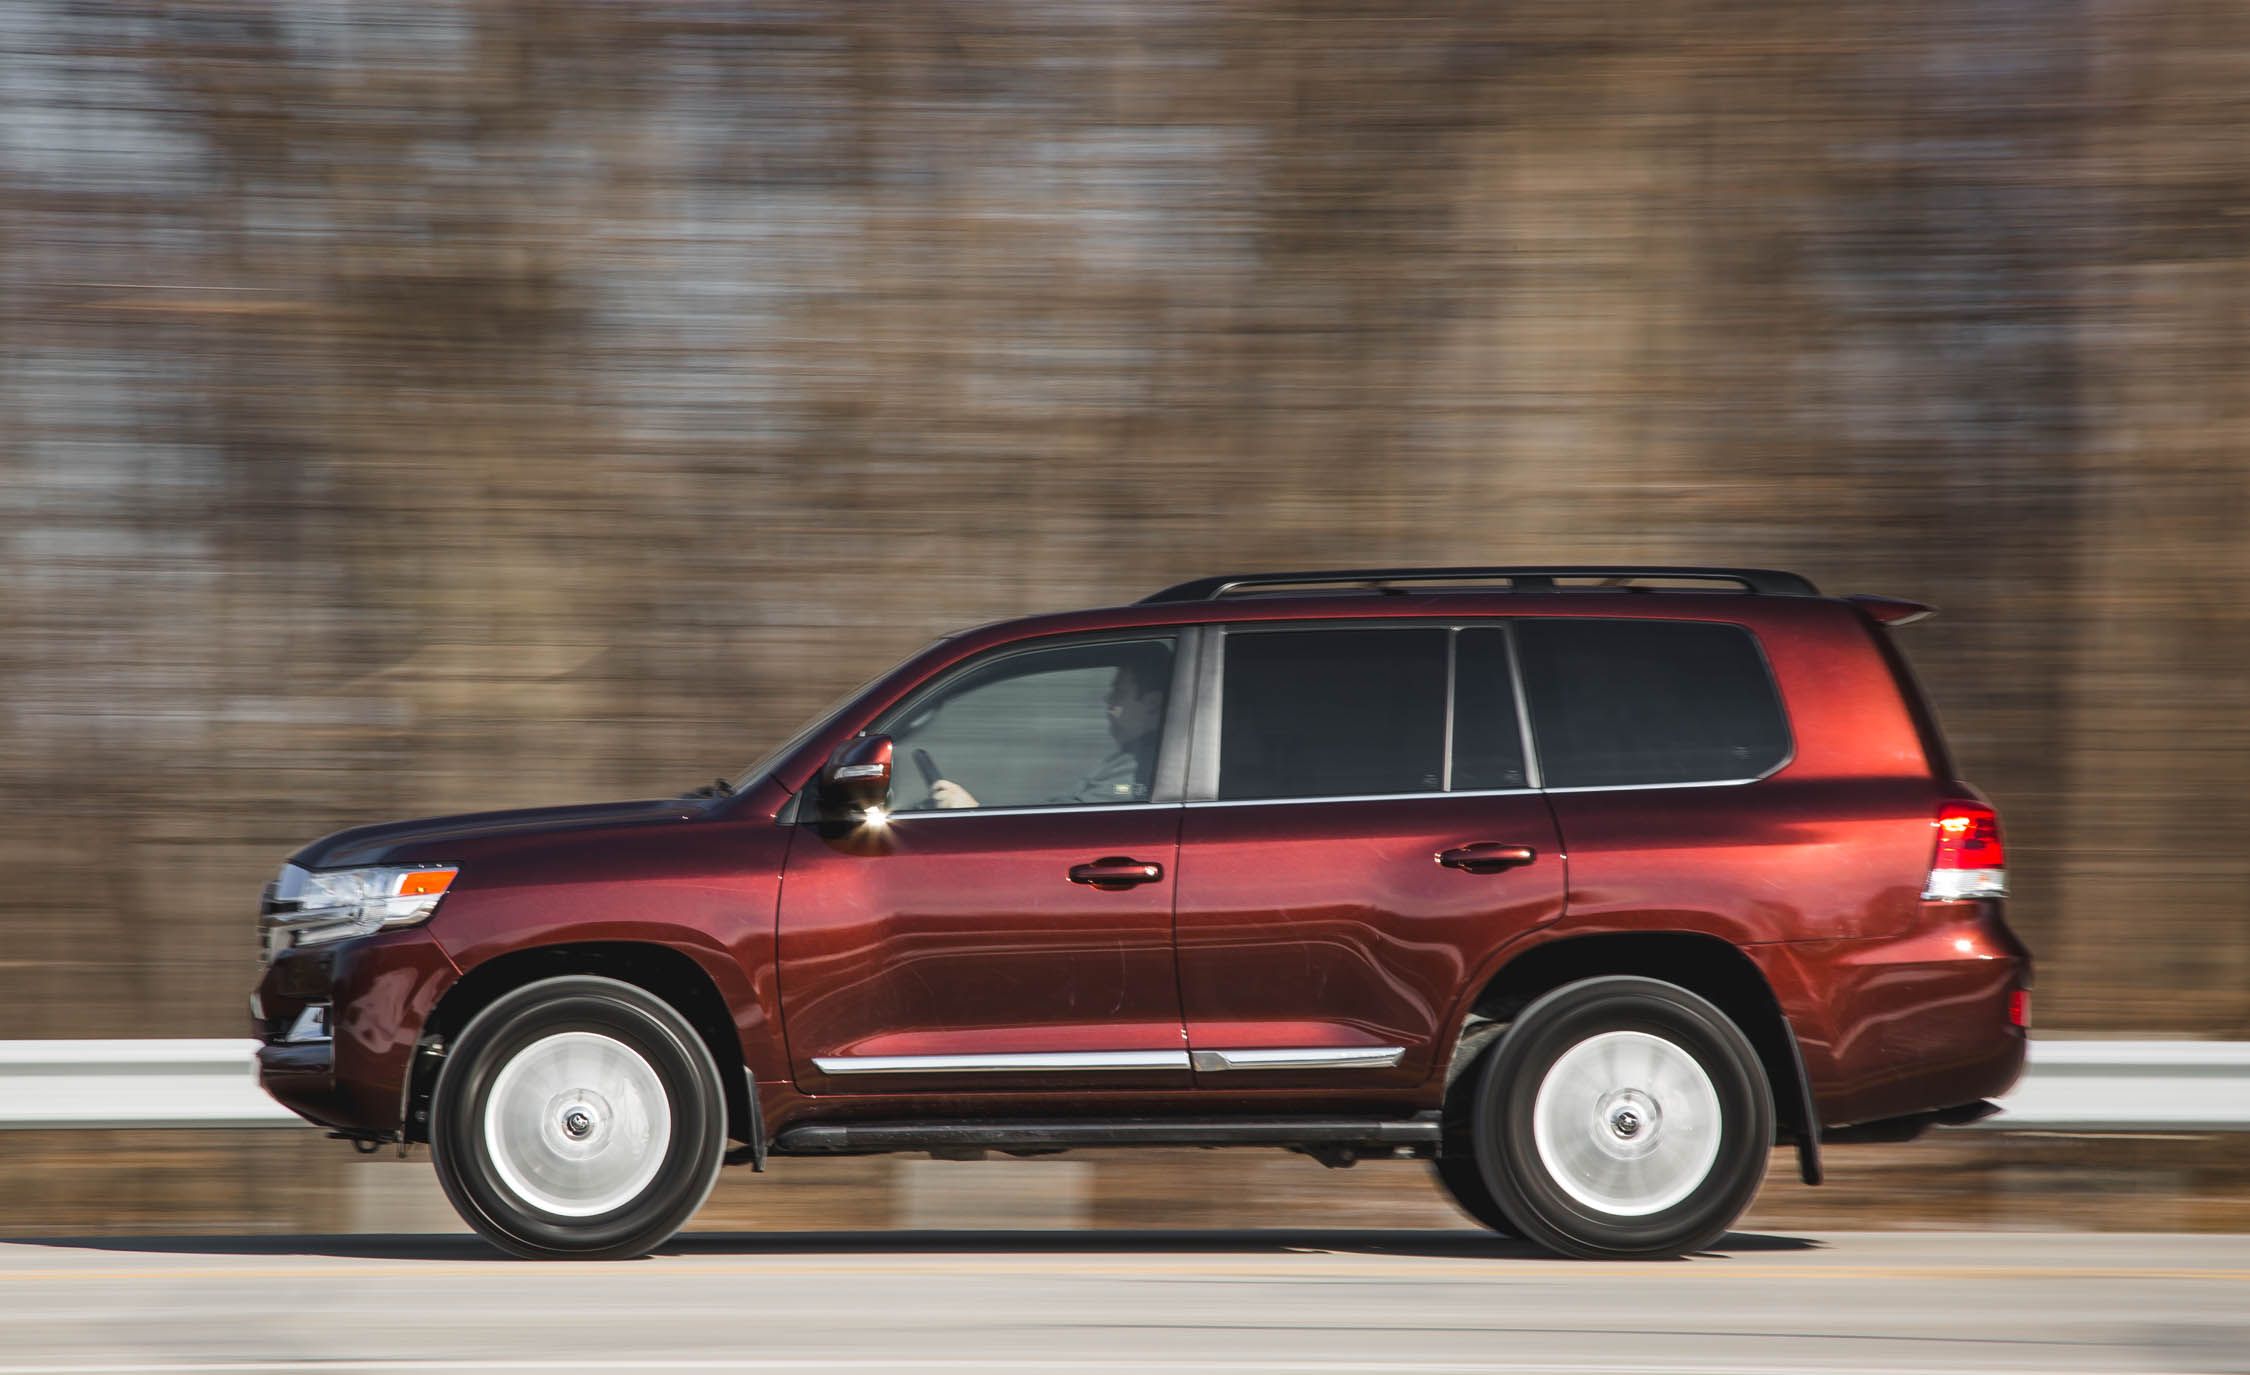 Revisiting Old-School: 2016 Toyota Land Cruiser Tested